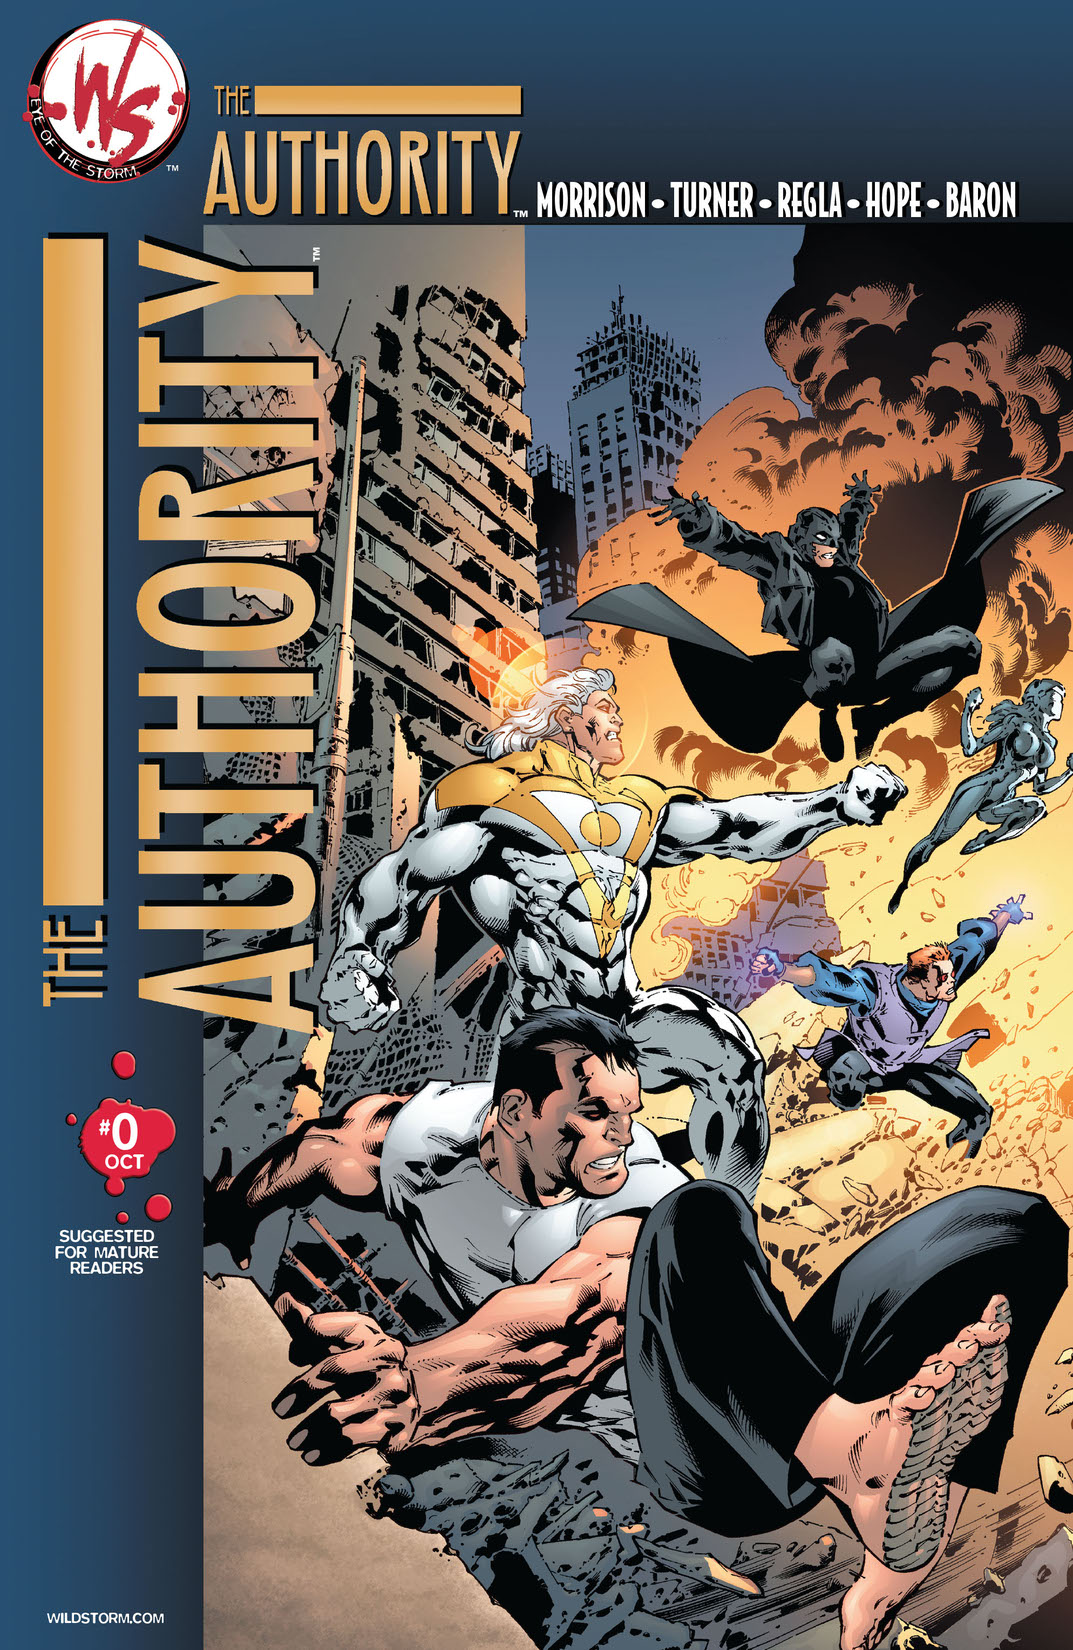 The Authority (2003-) #0 preview images